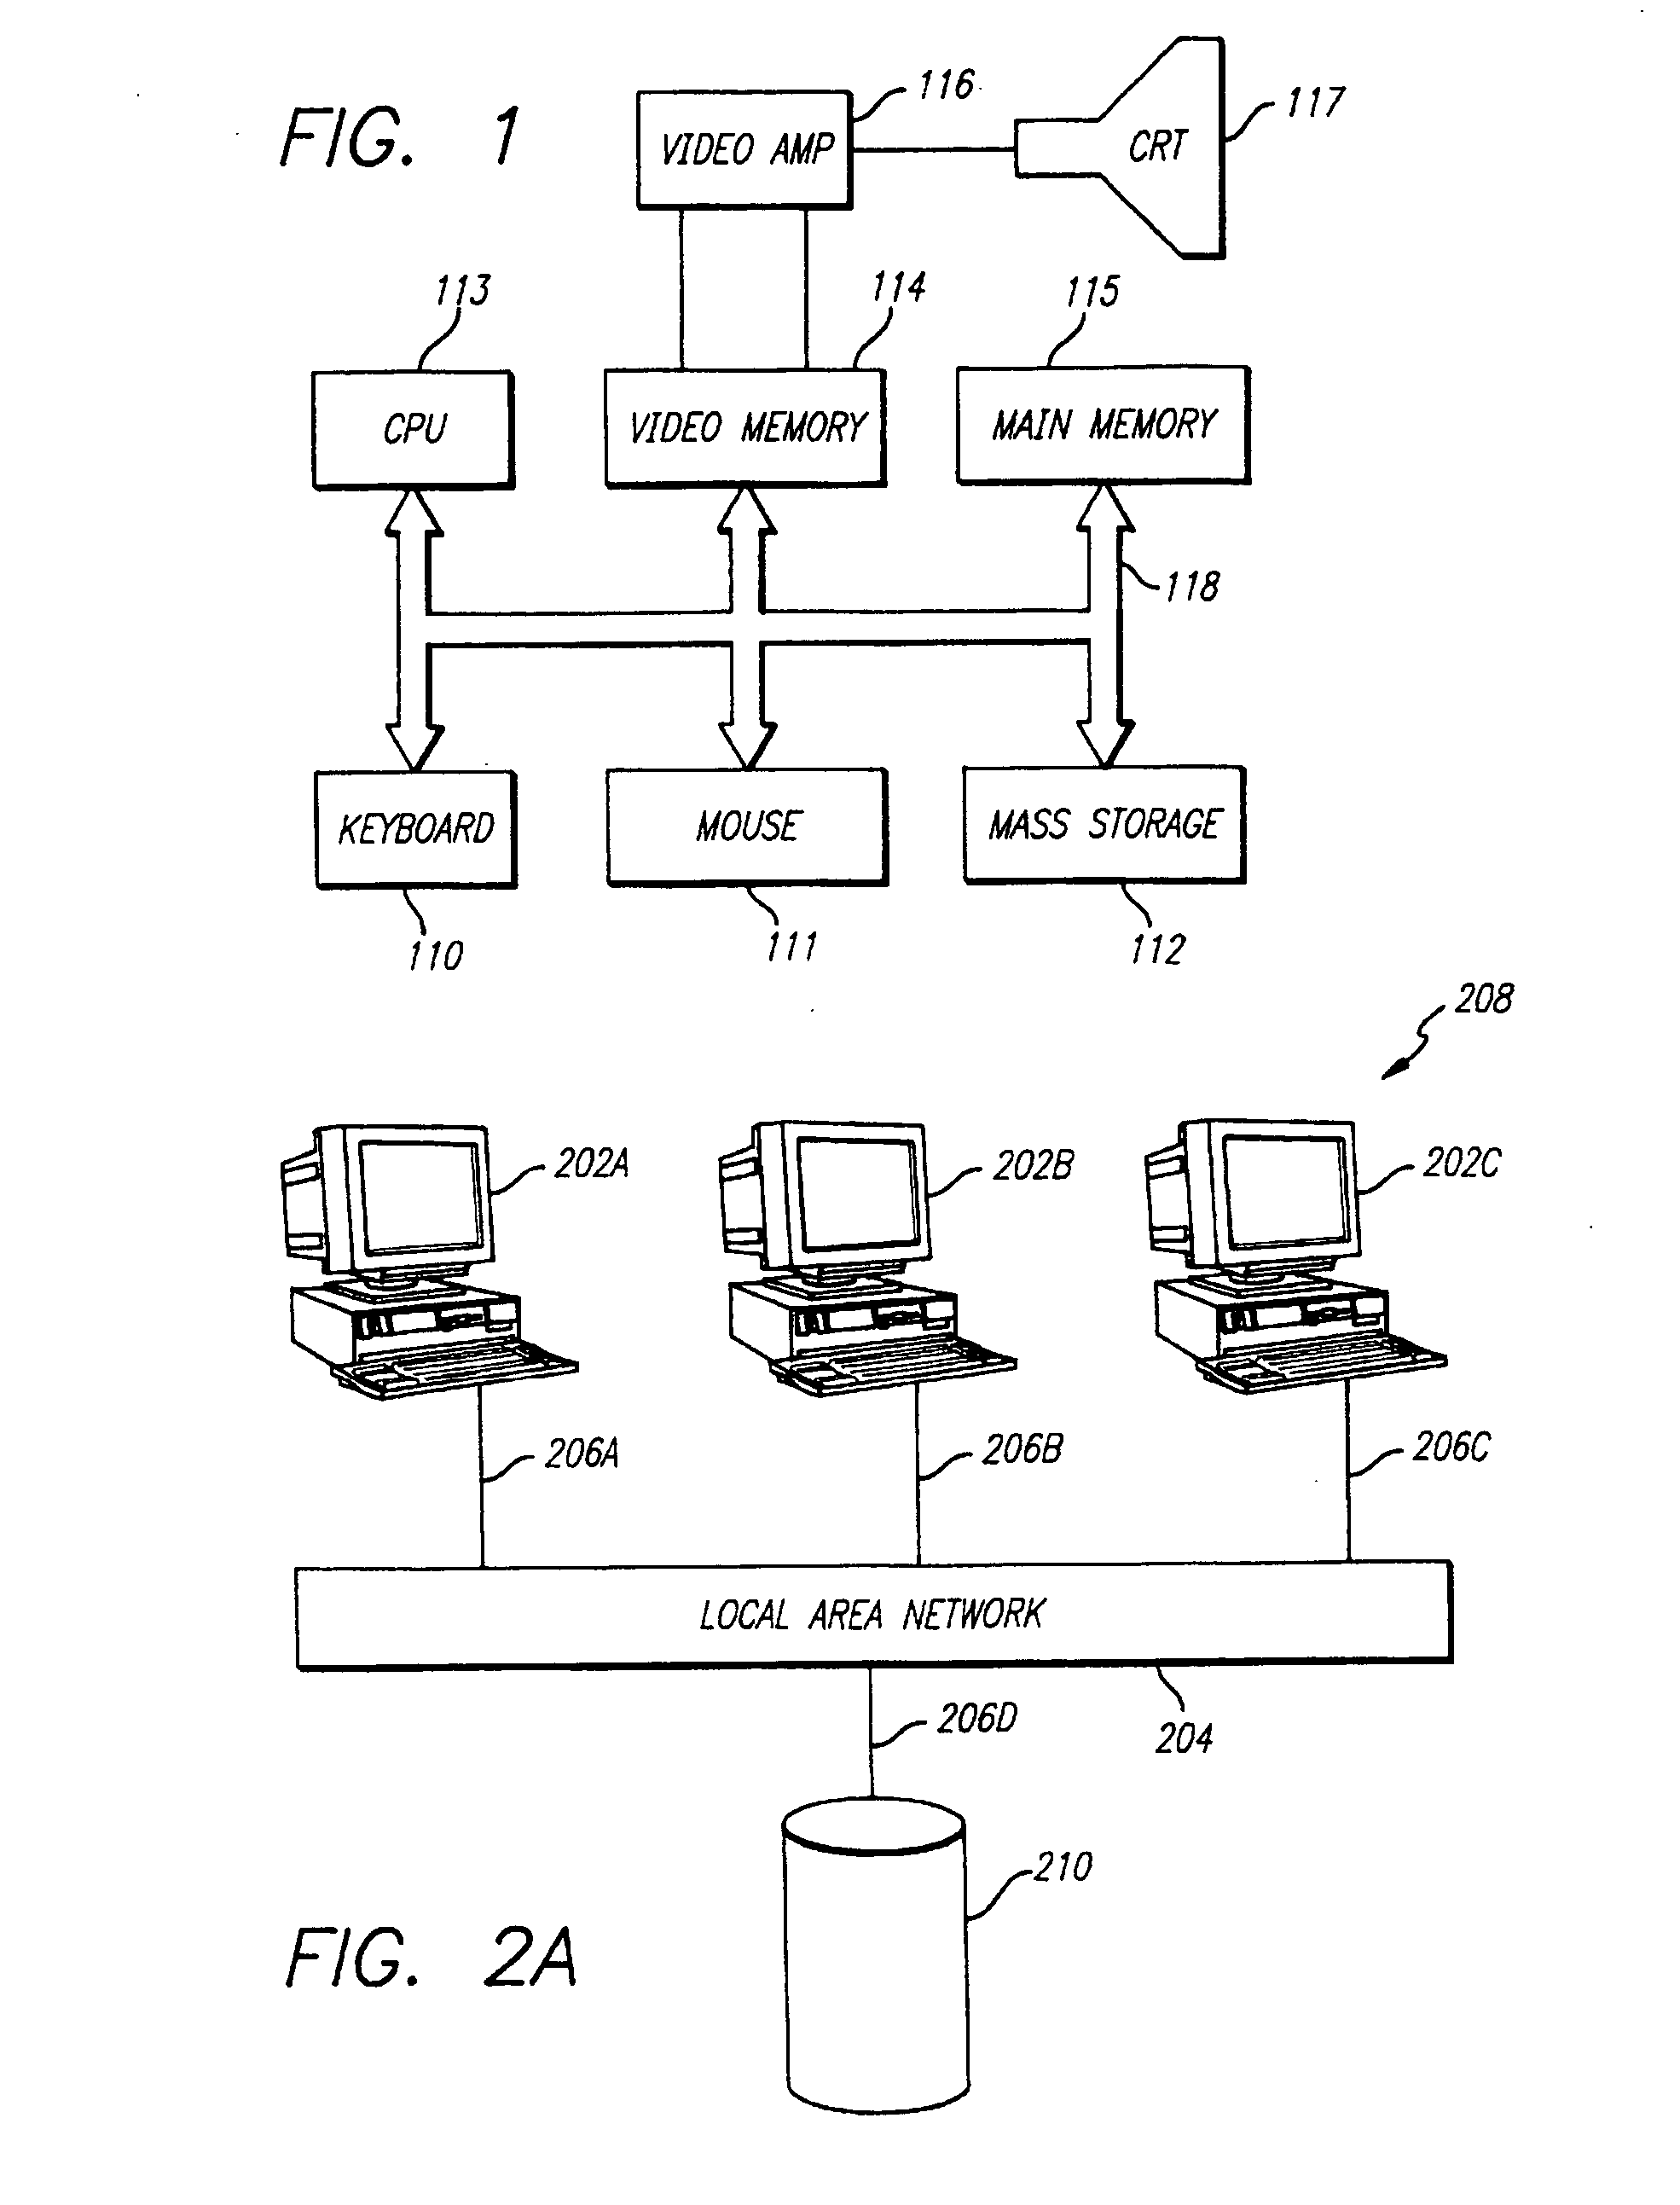 Method and apparatus for replicating information